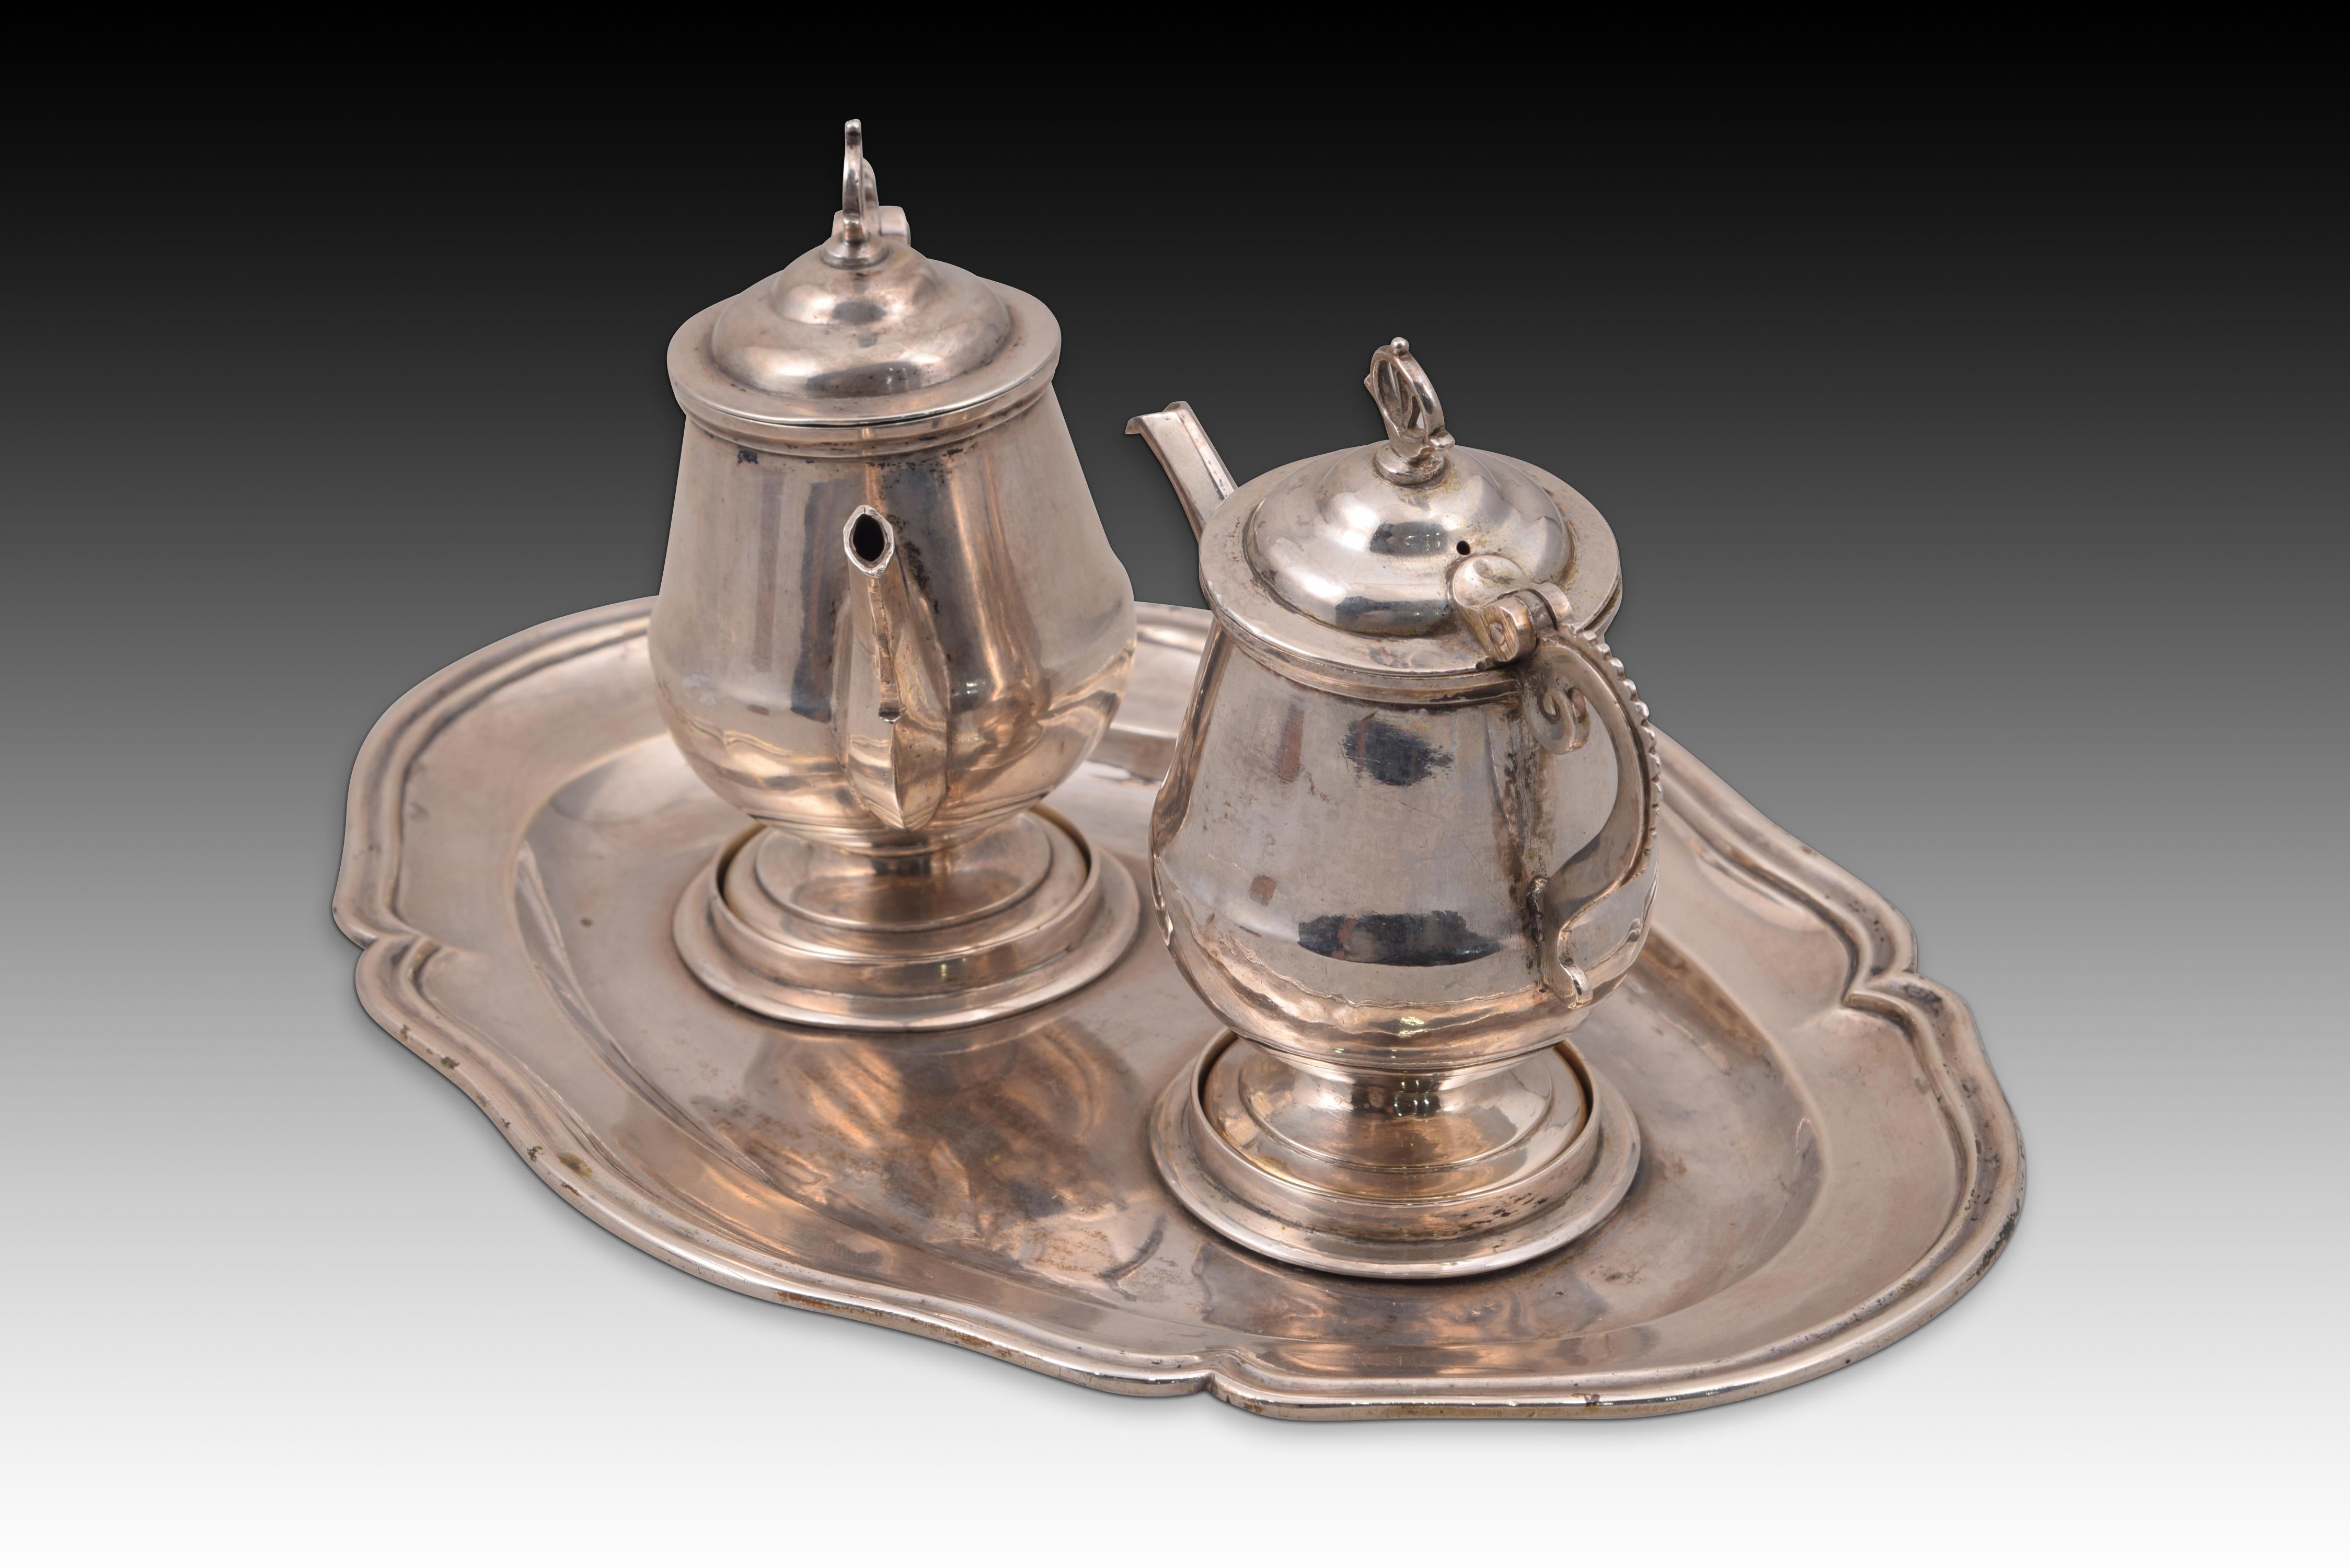 Pair of cruets with tray. Silver. Estrada, Saragossa, 18th century. 
With contrast markings. 
Set made of silver in its color composed of two cruets with a circular foot, an oval body narrowing towards the top, a stepped lid towards the center